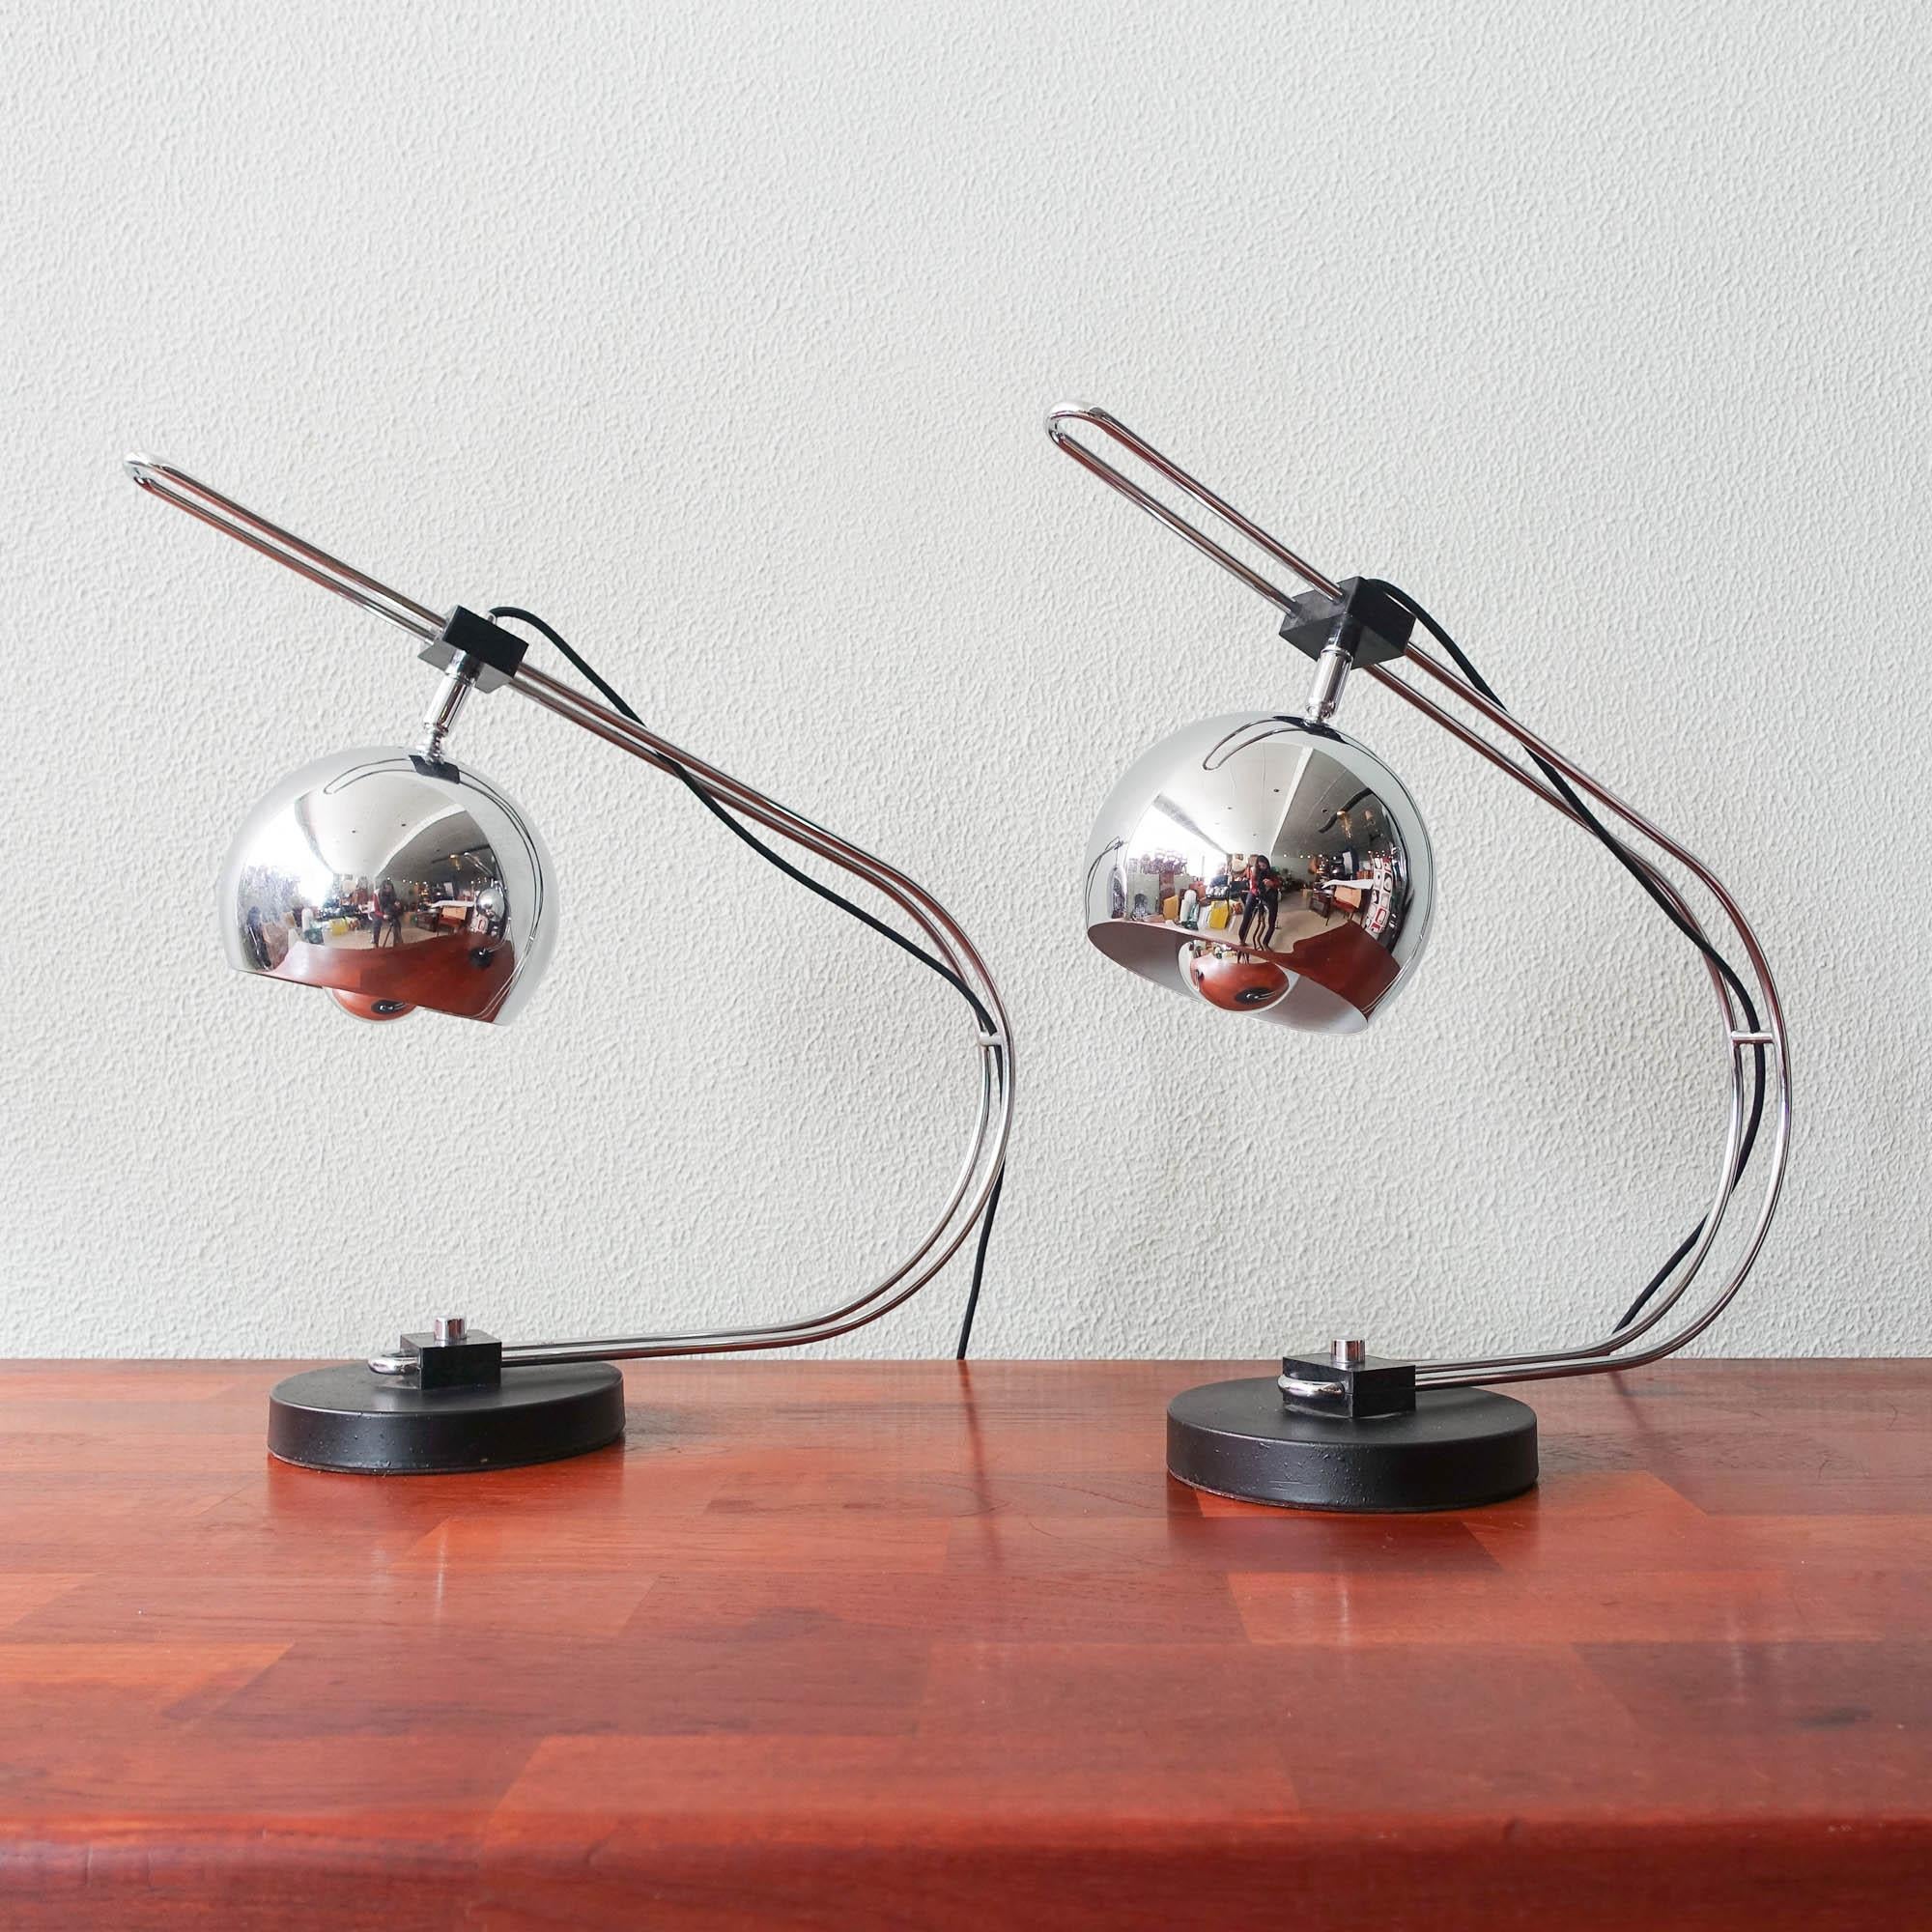 This pair of Eyeball table lamps was designed and produced by Reggiani, in Italy, during the 1970's. The chrome spotlight slides on a curved chromed stand permitting to adjust the height according to the needs. It can also be directed in any desired